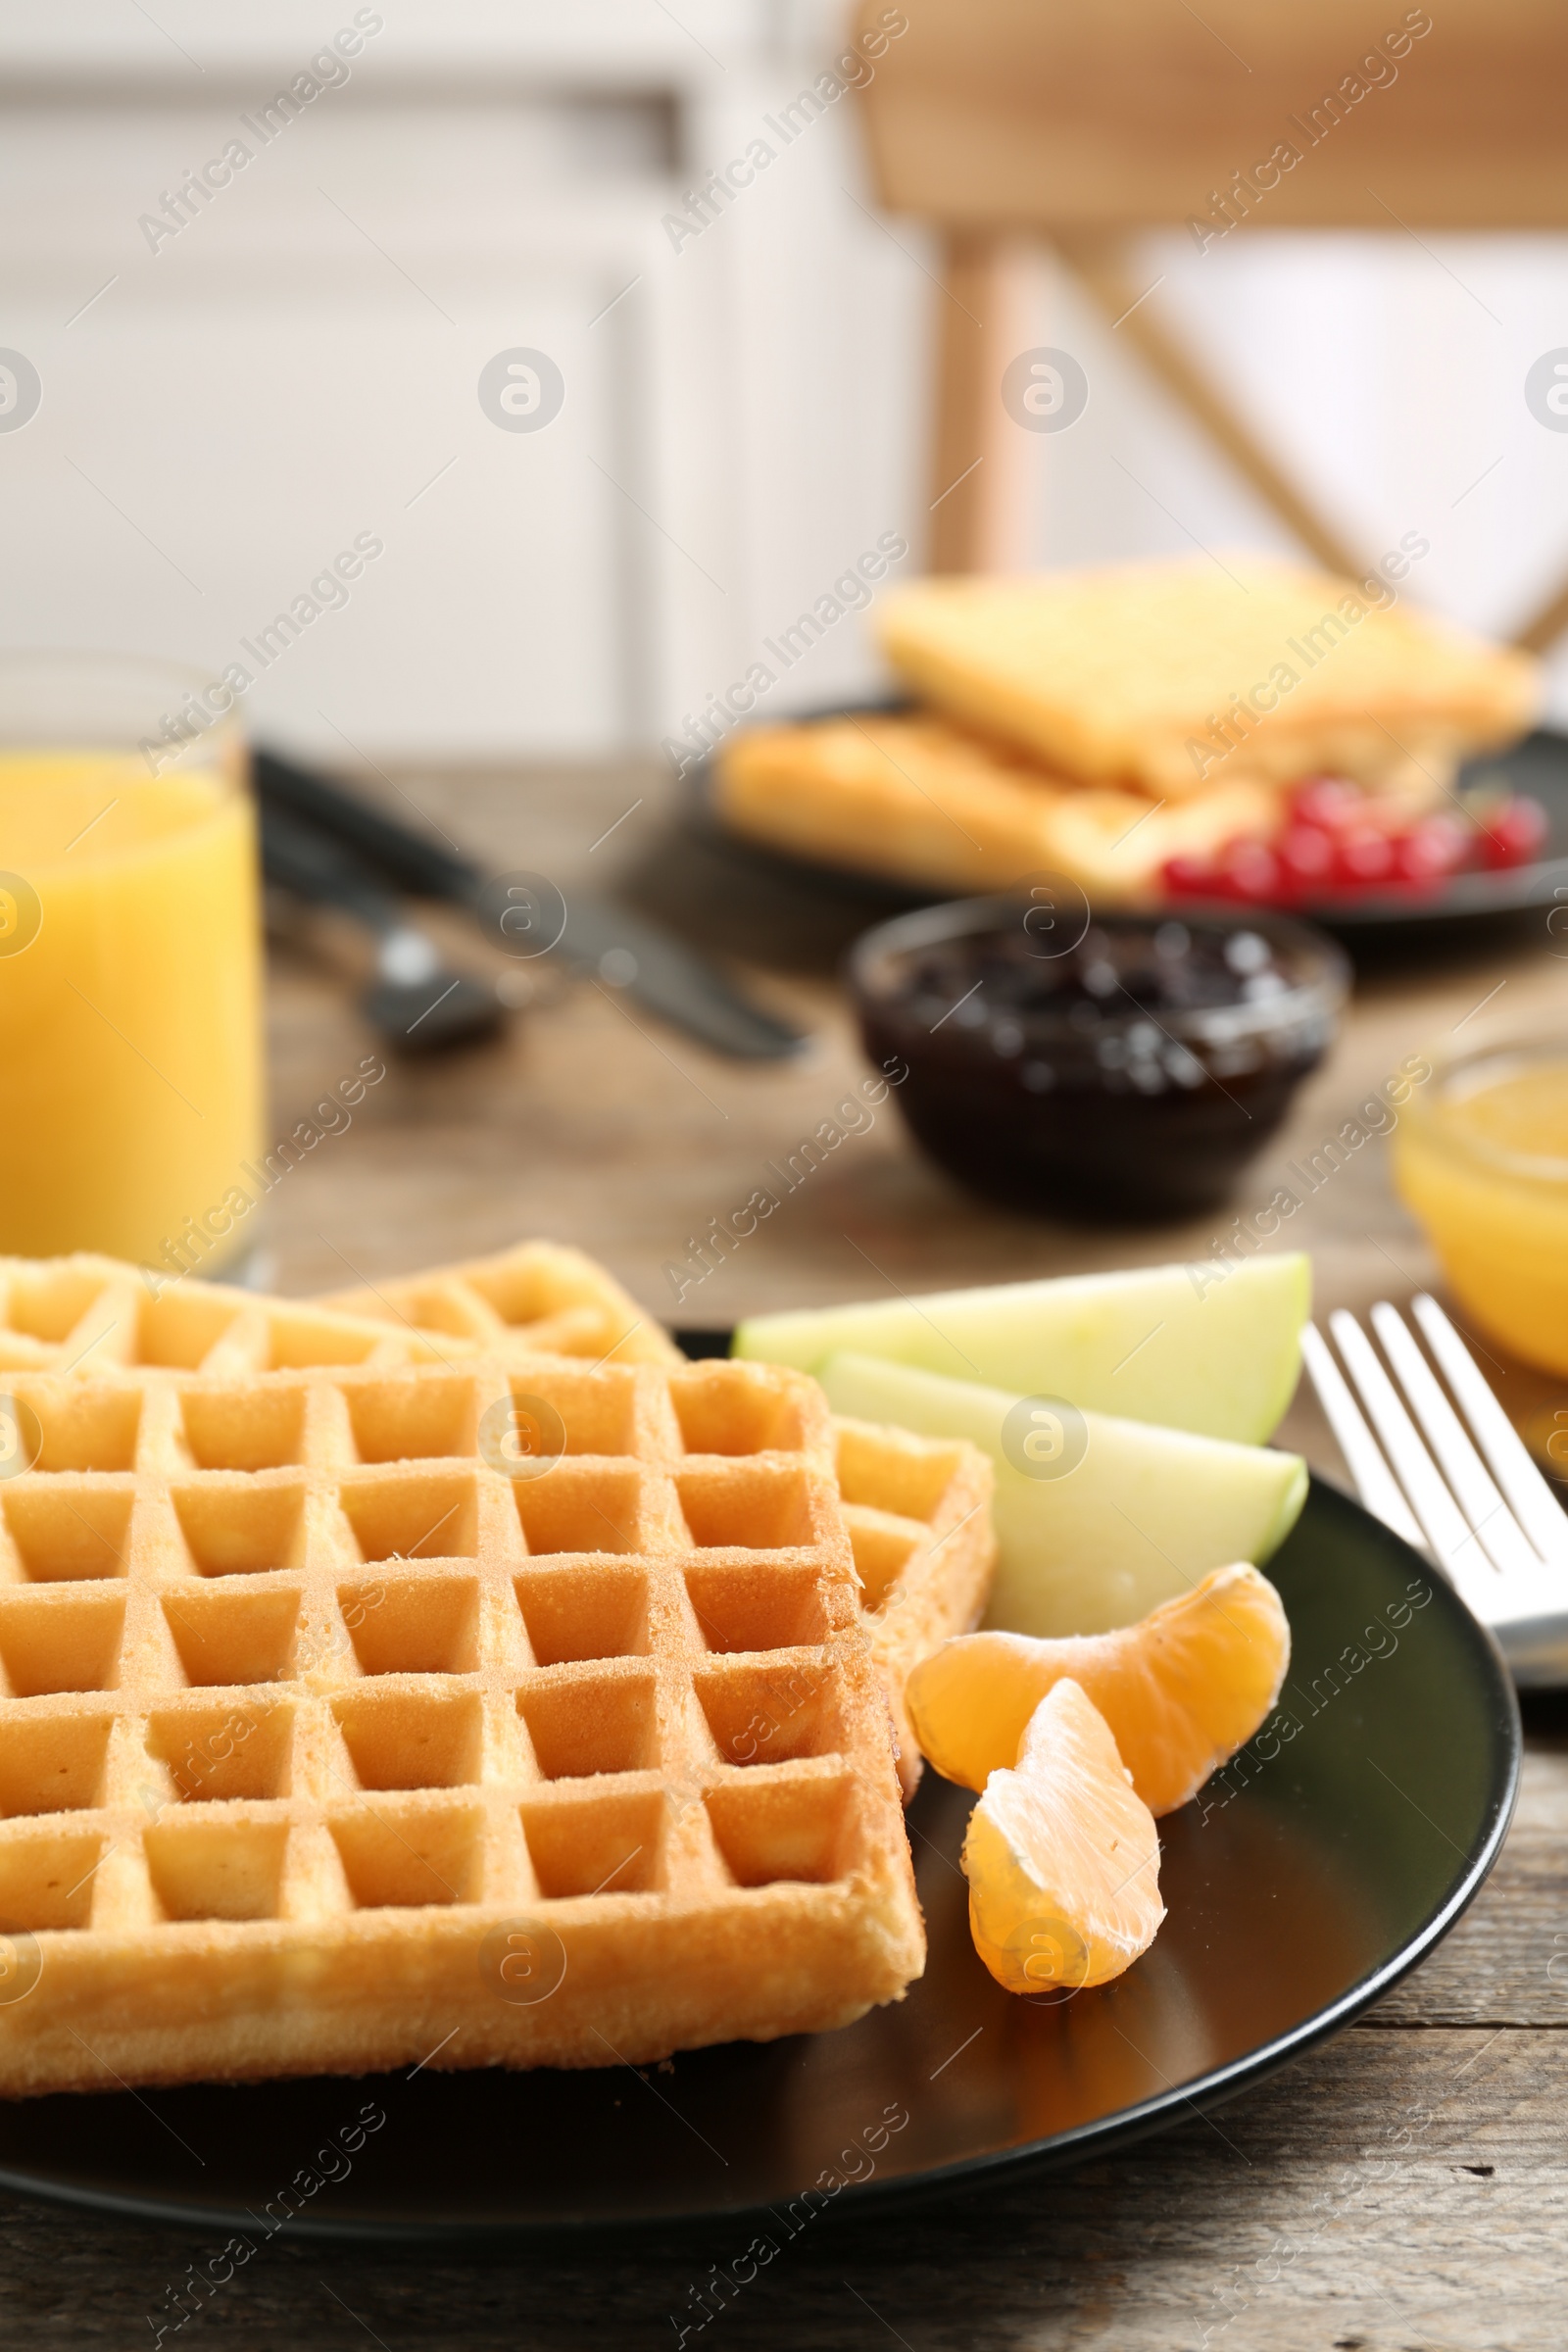 Photo of Waffles with fruits served on wooden table. Delicious breakfast